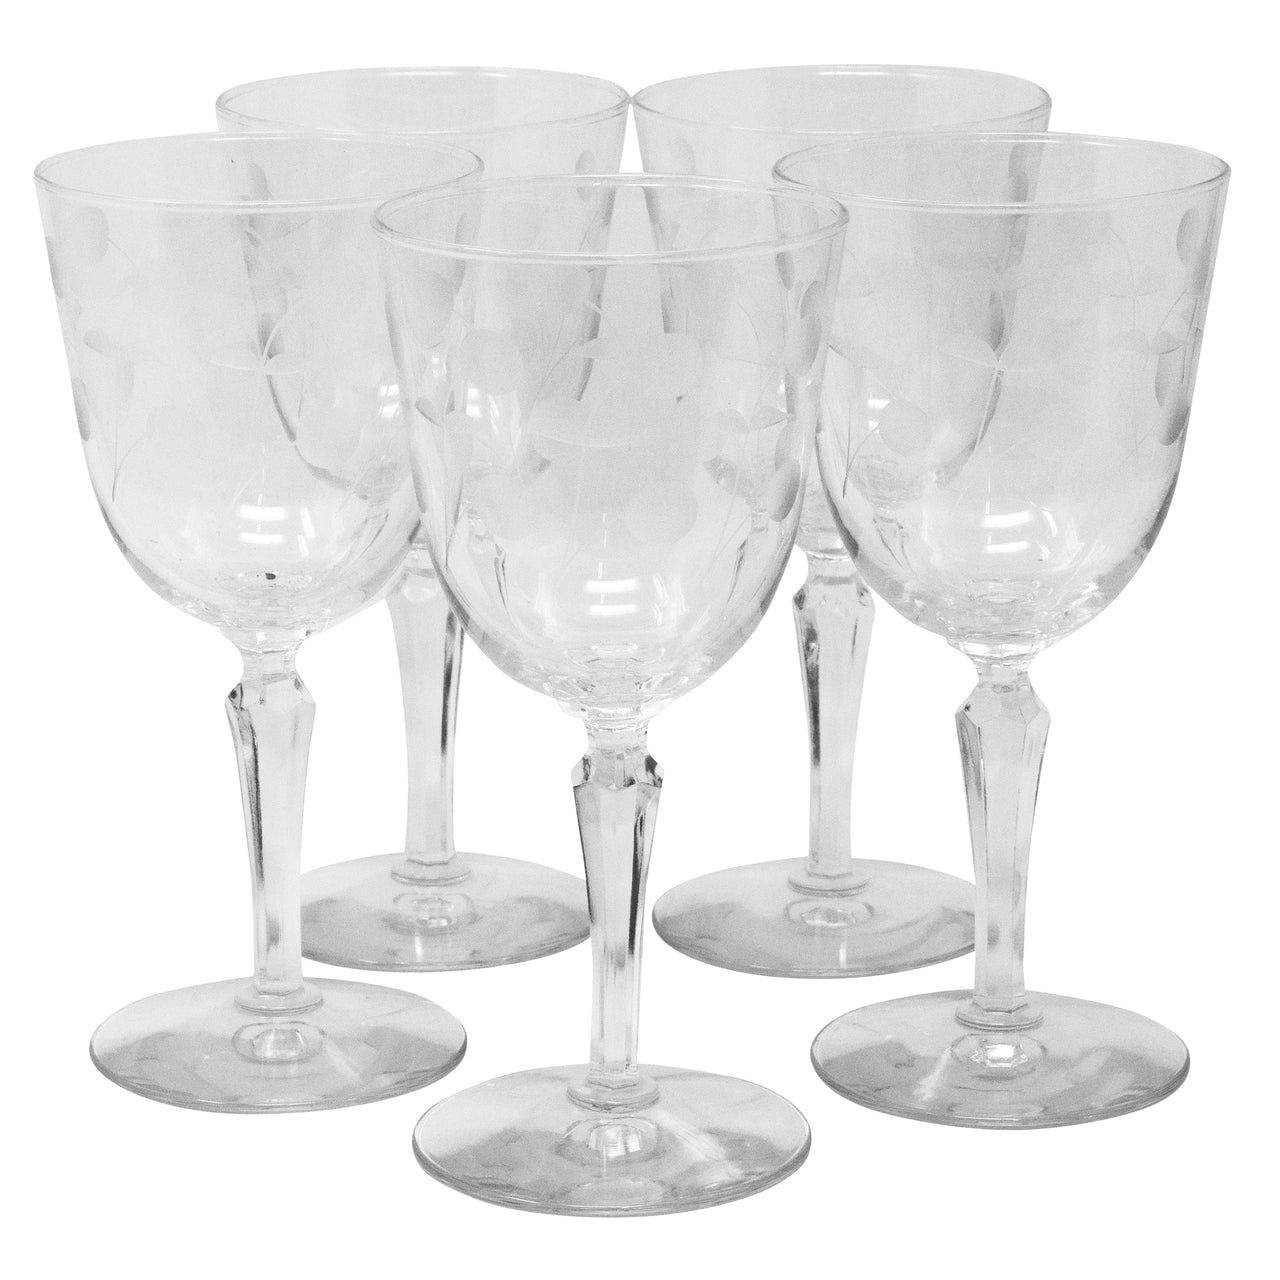 Vintage Etched Cherries and Stems Wine Glasses | The Hour Shop